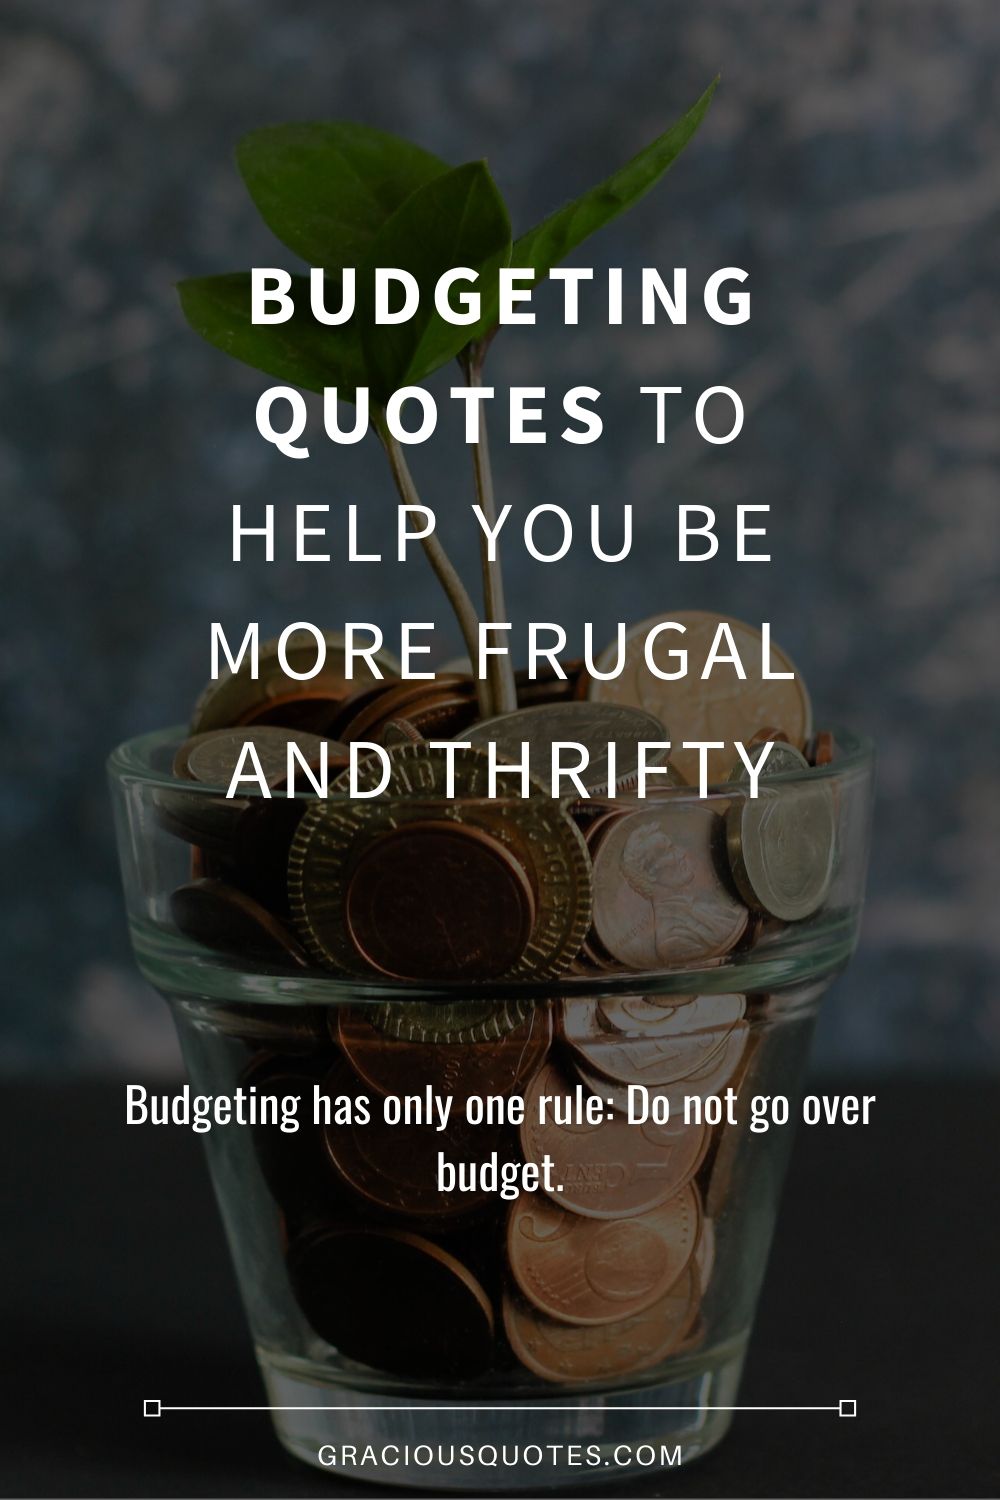 Budgeting-Quotes-To-Help-You-Be-more-Frugal-And-Thrifty-Gracious-Quotes